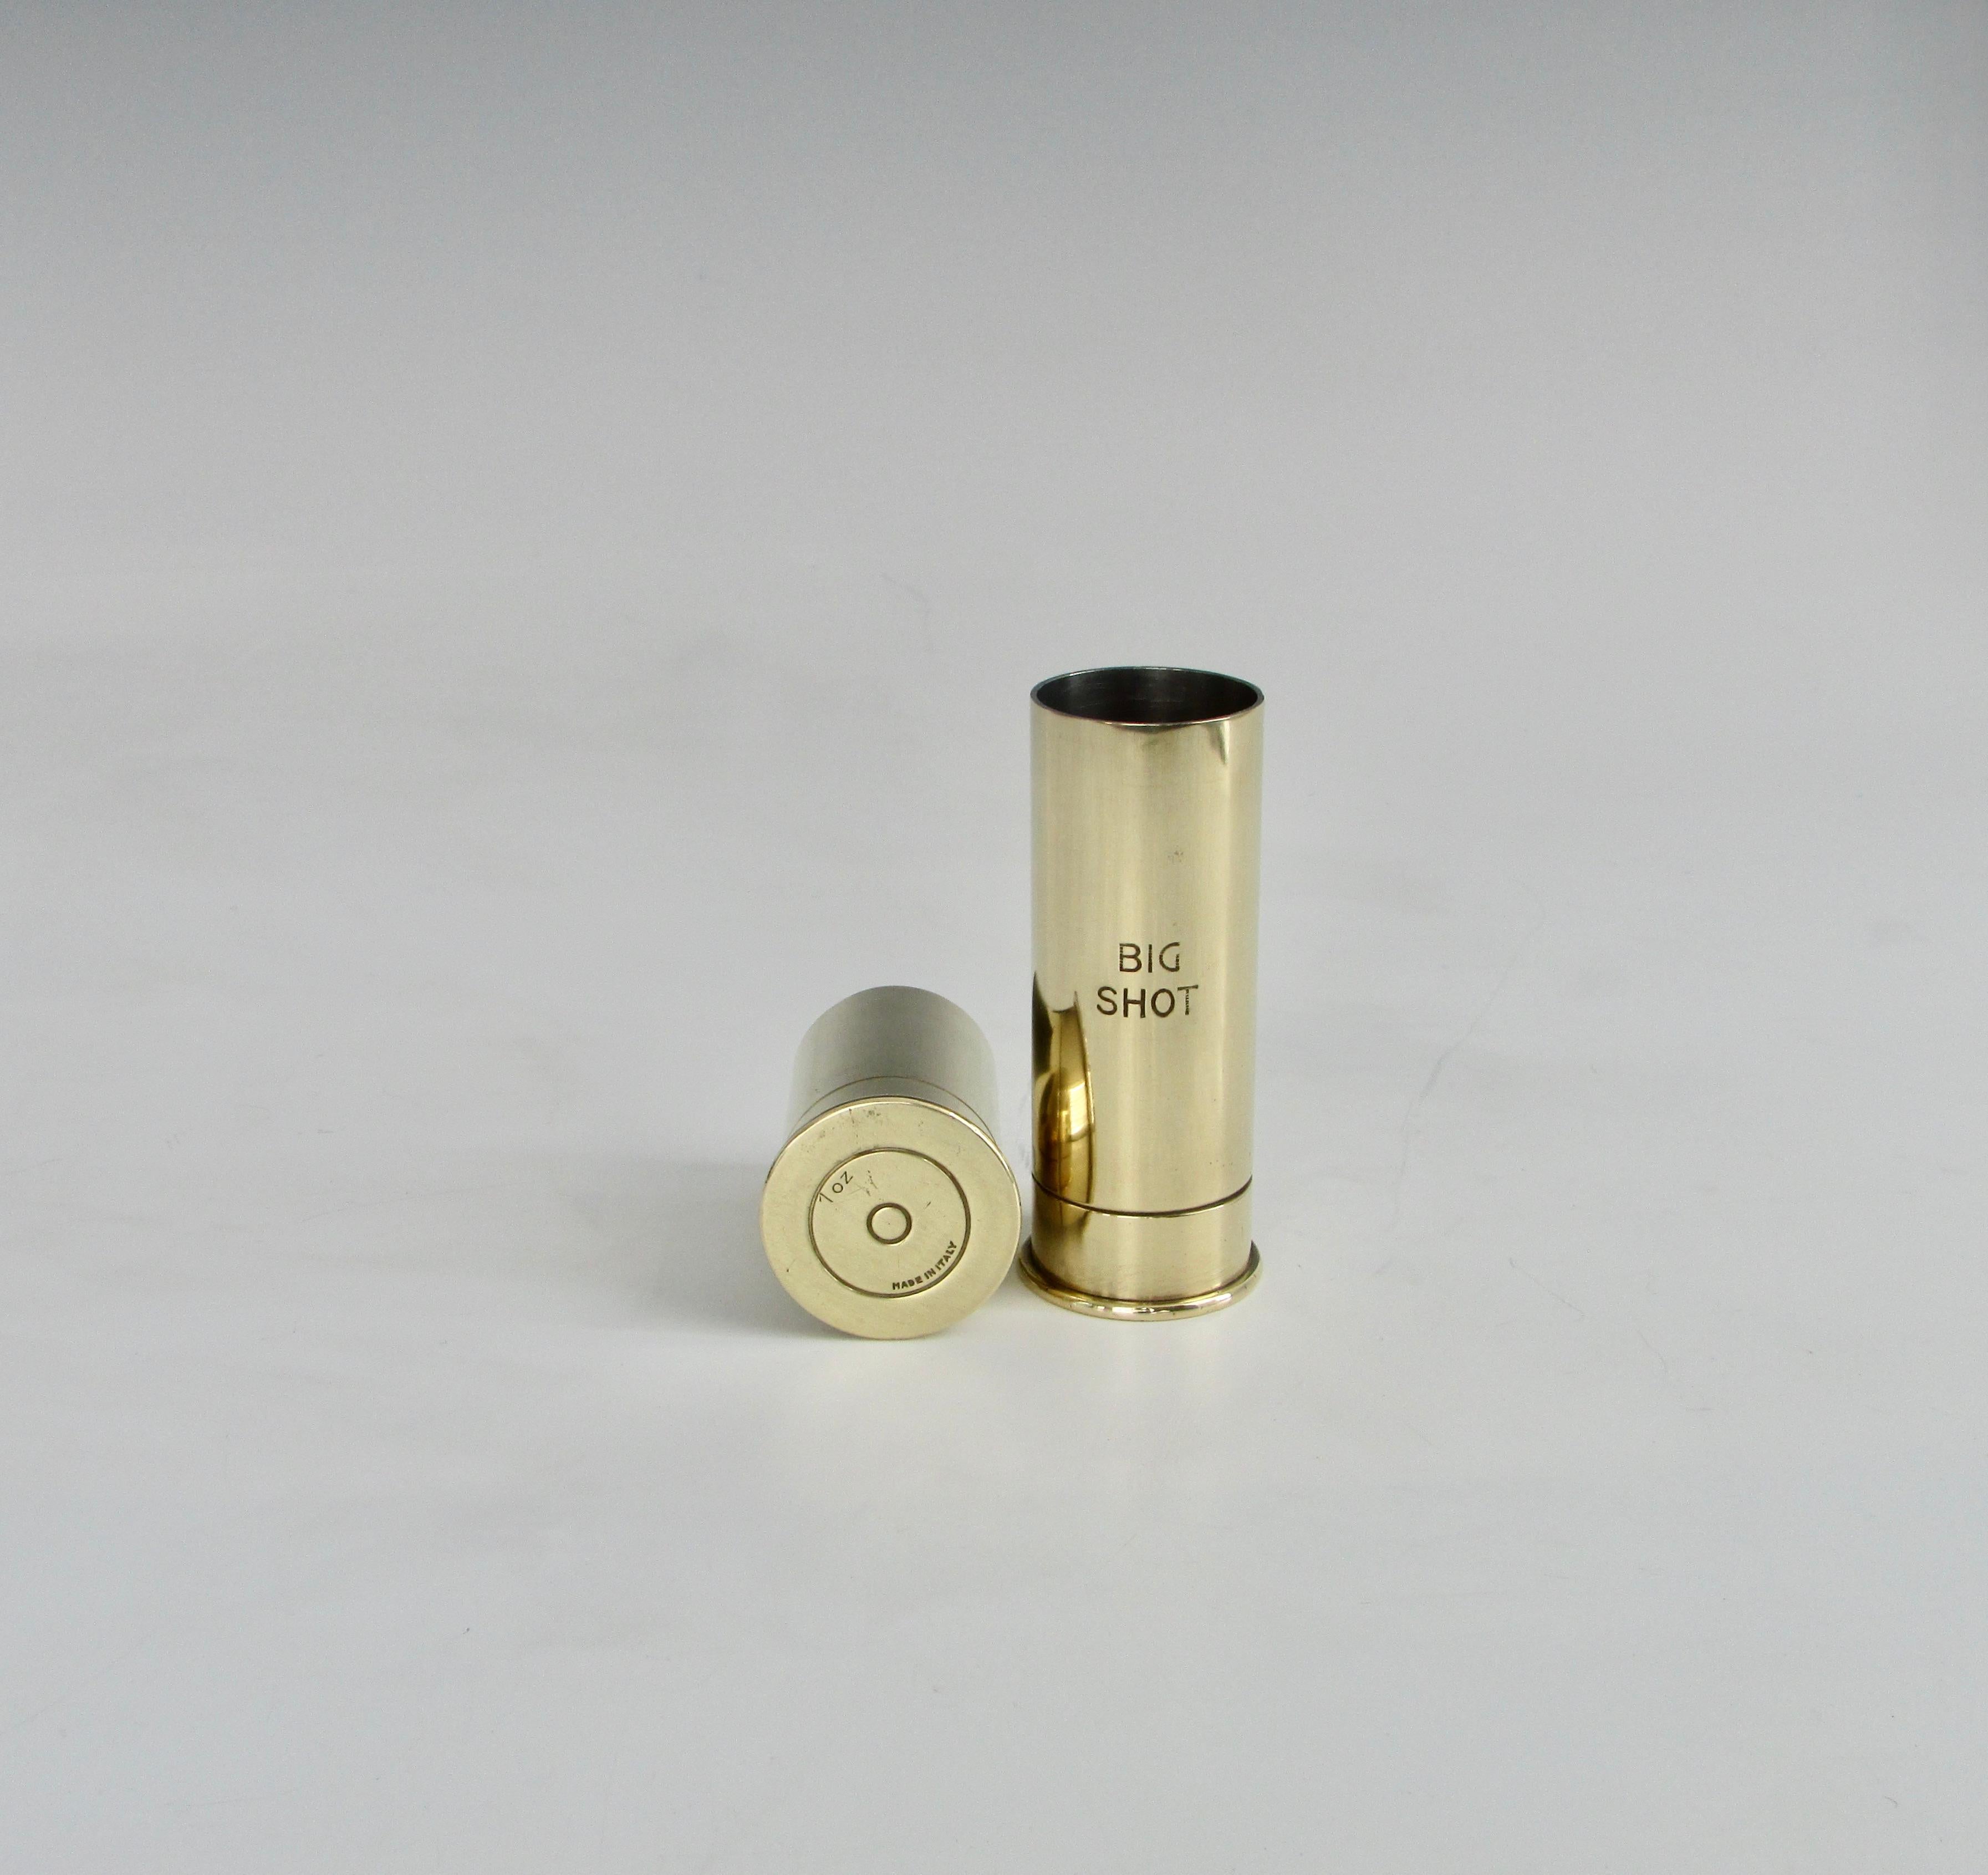 Big shot little shot pair of polished brass shot glasses marked one ounce and two ounce. Styled to look like shotgun shells. Polished brass with tinned or silvered interiors. Measure: 2.25 and 3.5 tall.